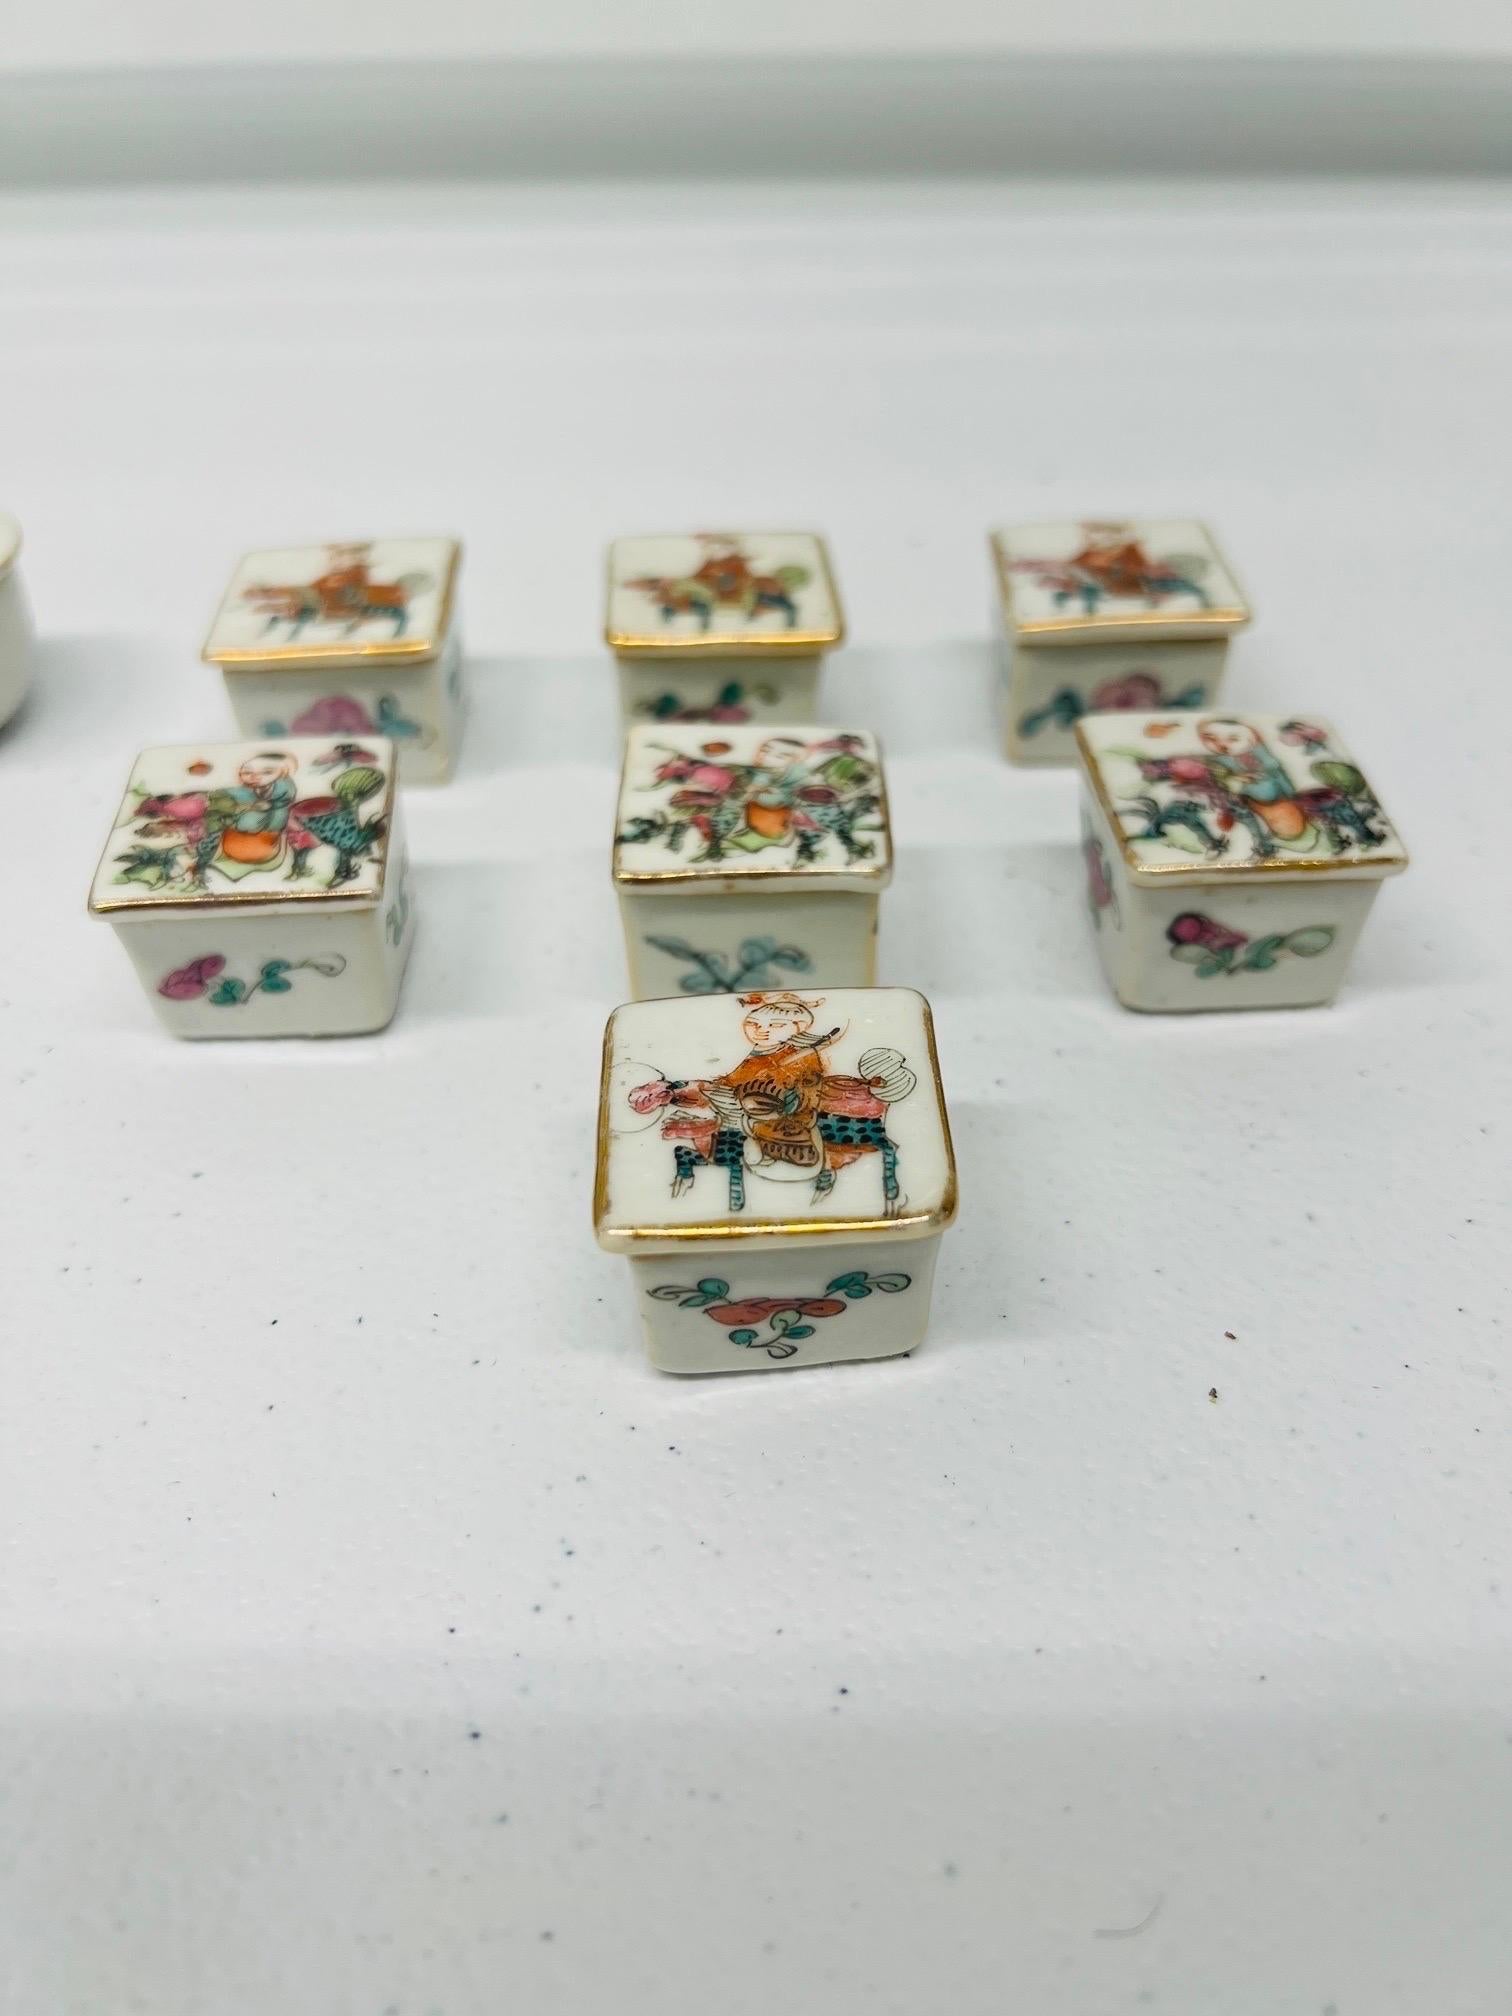 Qing Dynasty - 13 Antique Chinese Porcelain Enameled Salt Boxes In Good Condition For Sale In Atlanta, GA